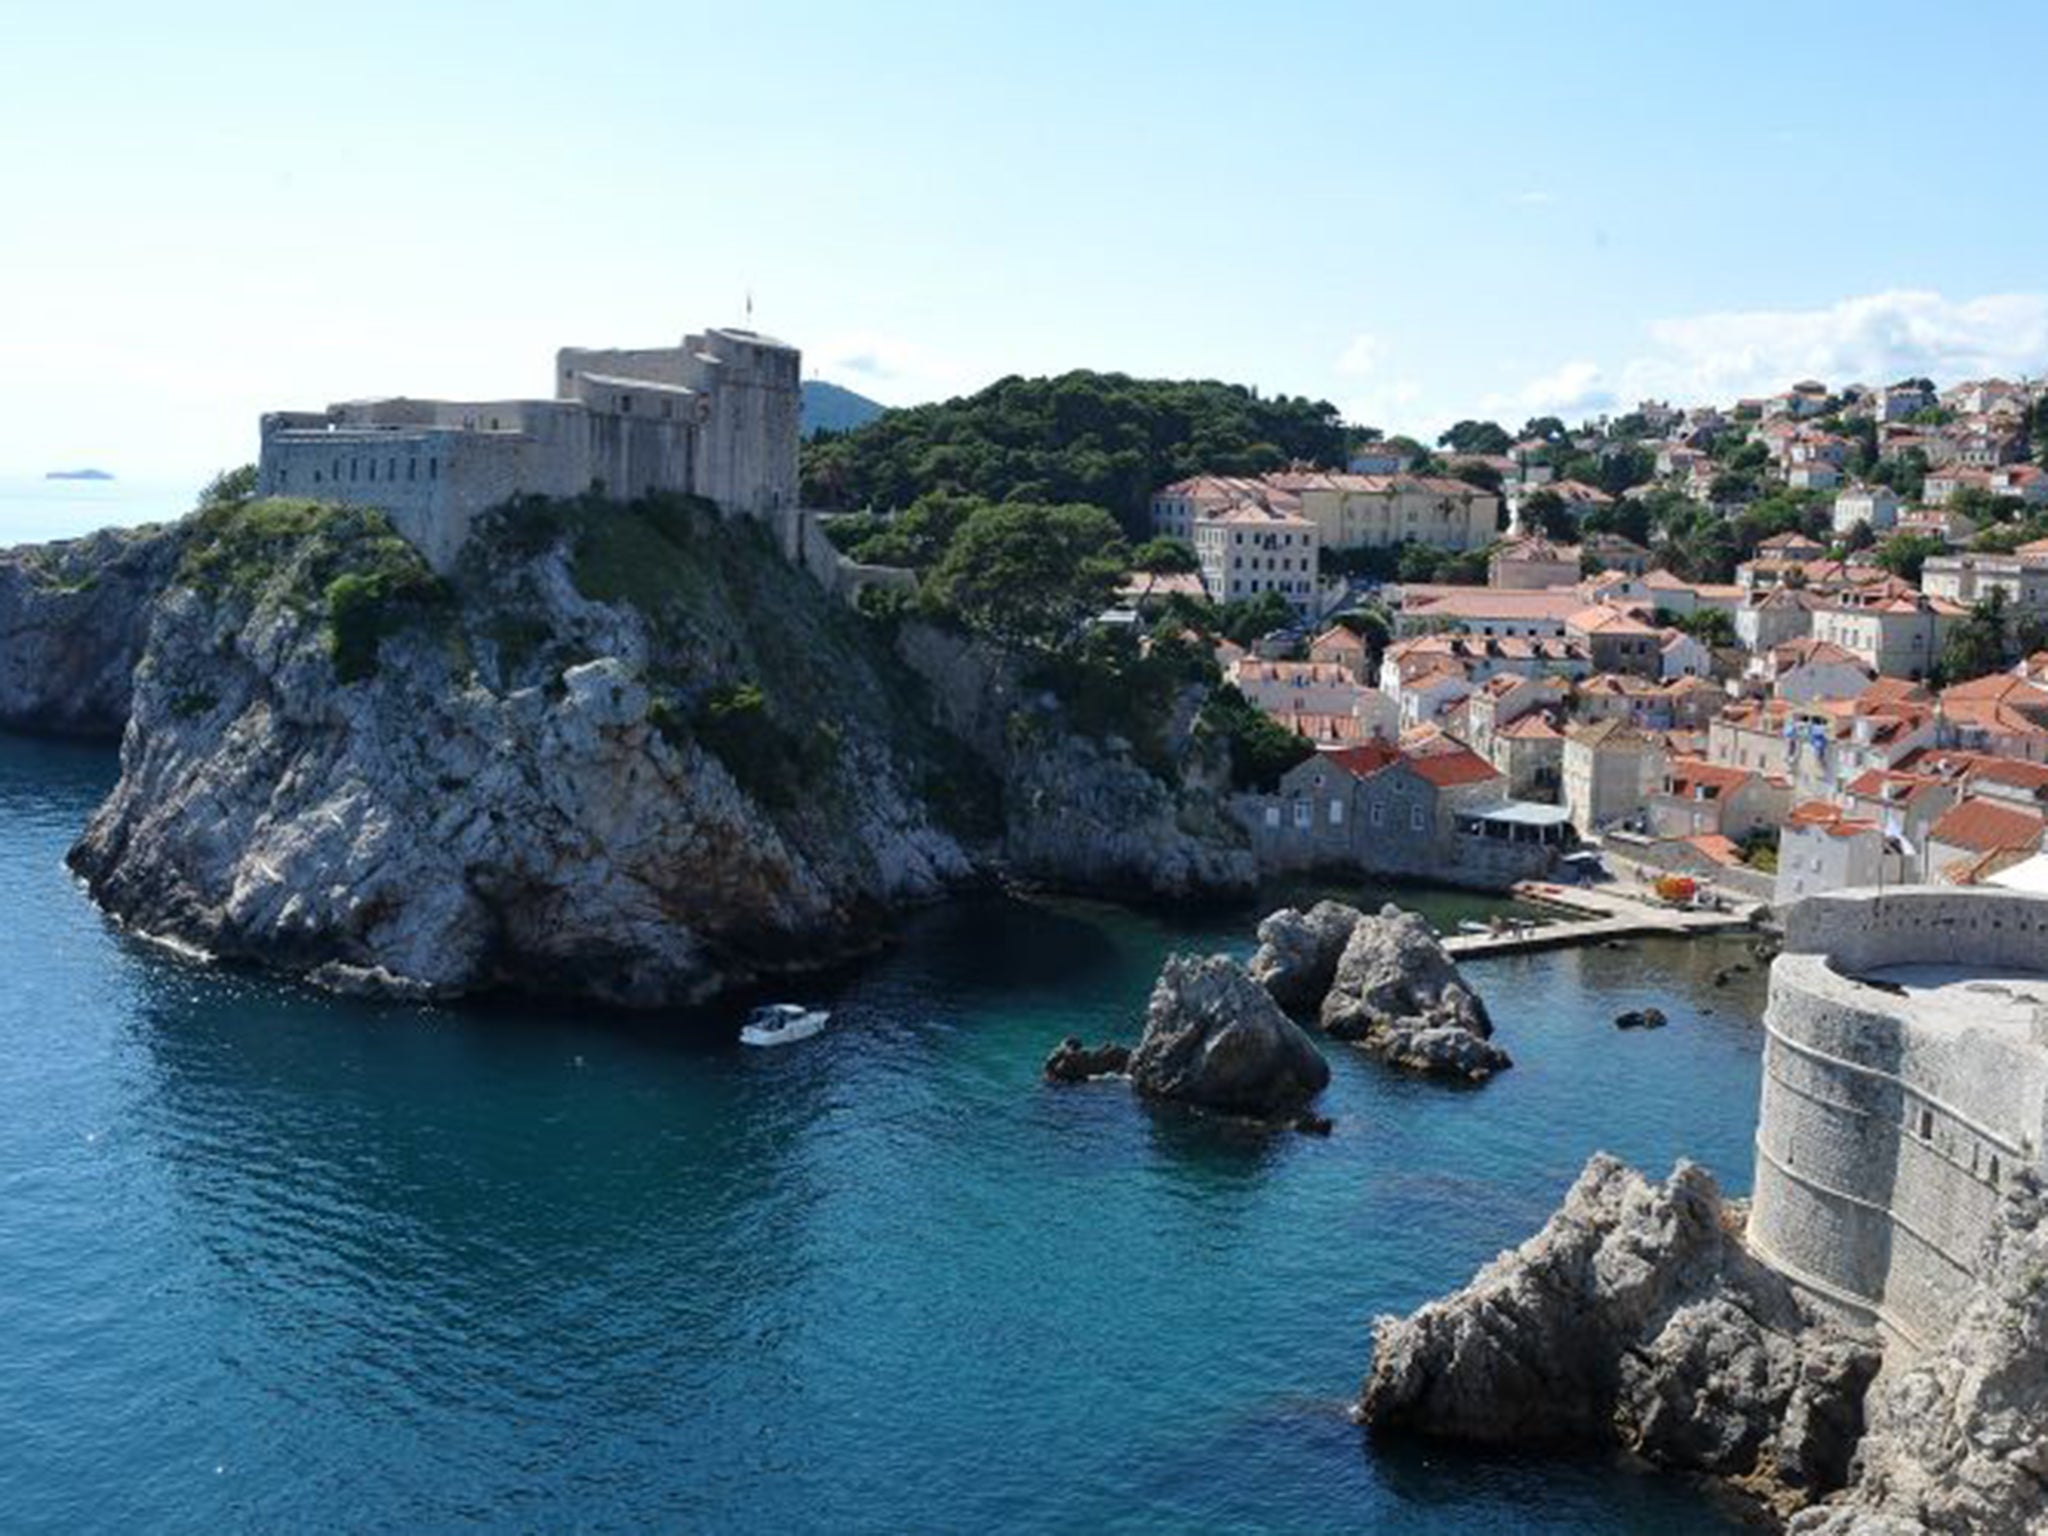 New schemes are opening up the world to workers, with cities such as Dubrovnik on the agenda